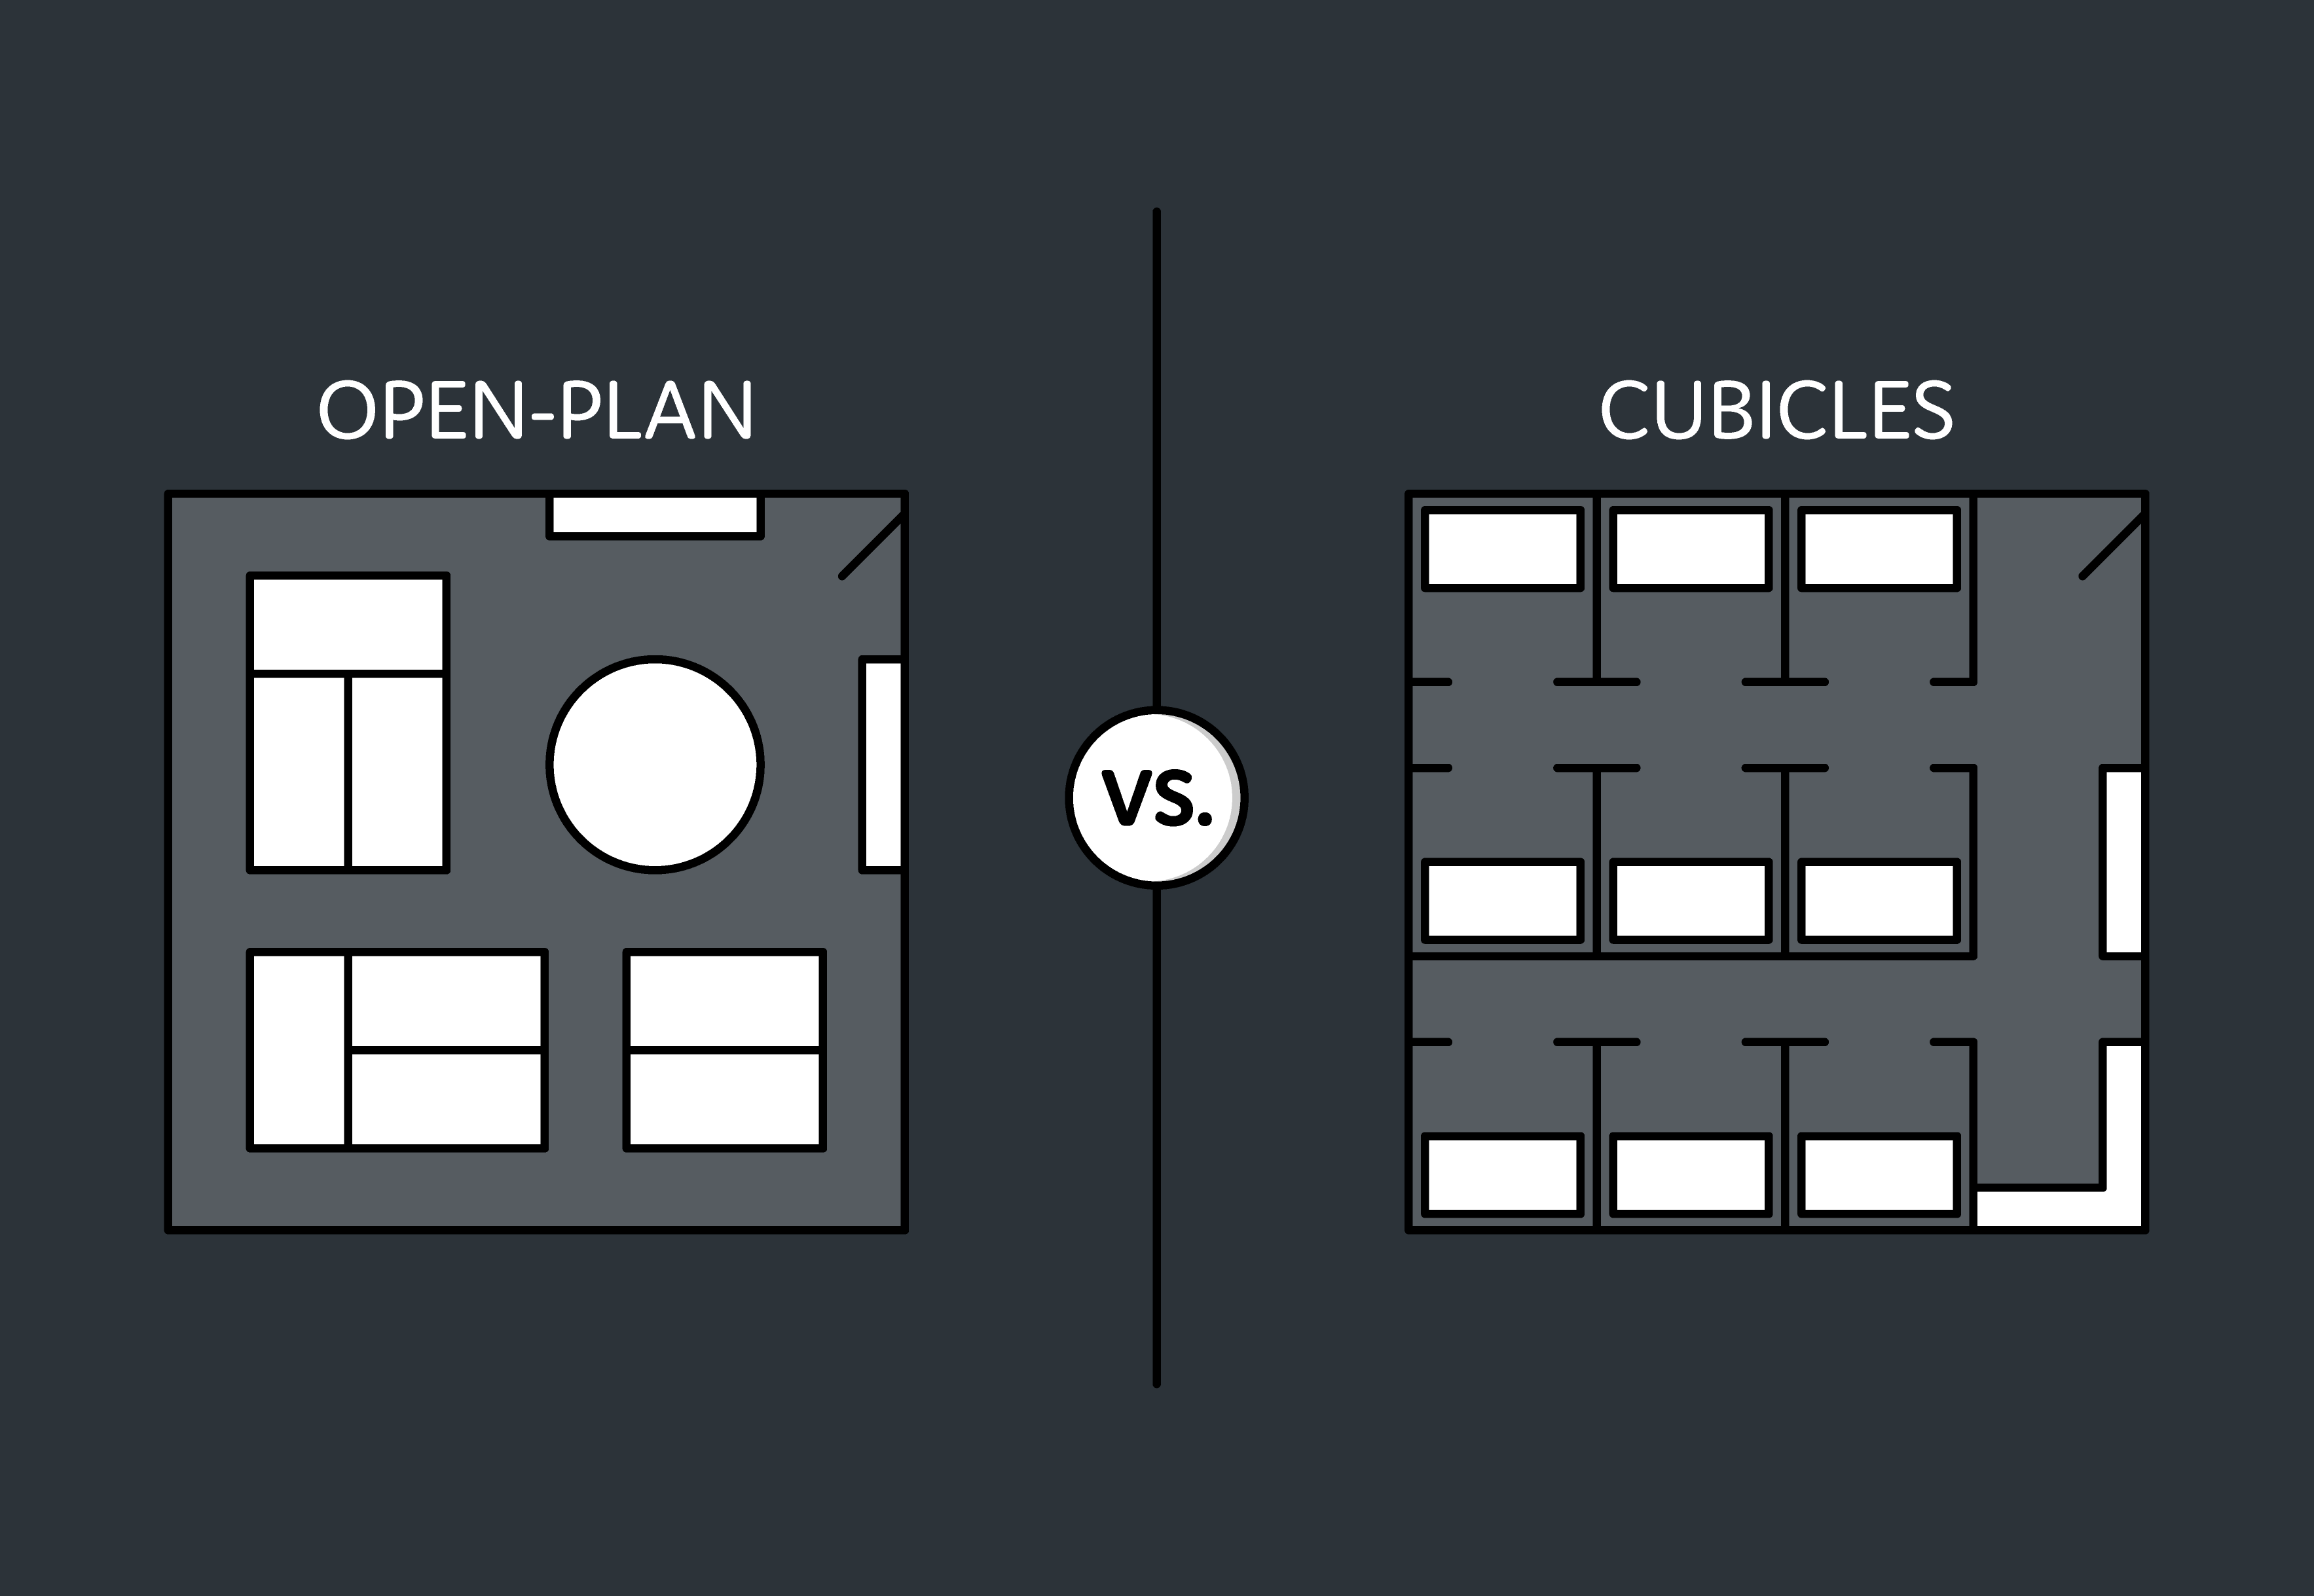 Friday face-off: open plan office vs. cubicles